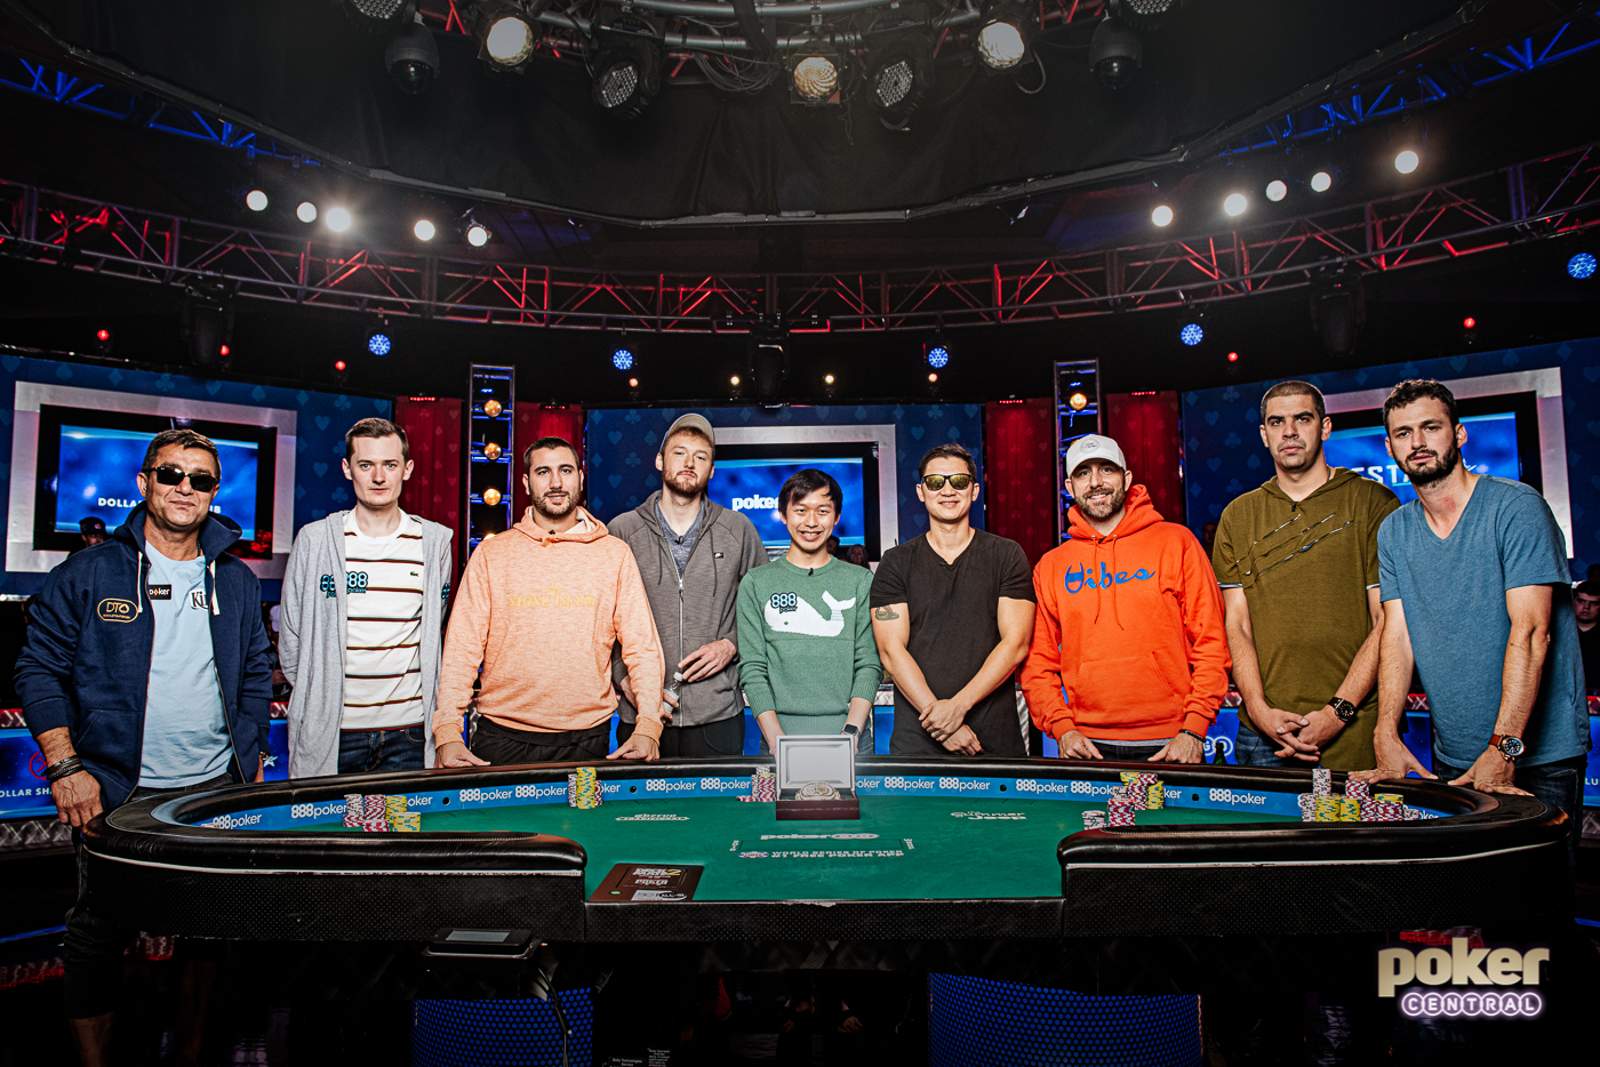 The Final Table of the 2019 World Series of Poker Main Event is Set!